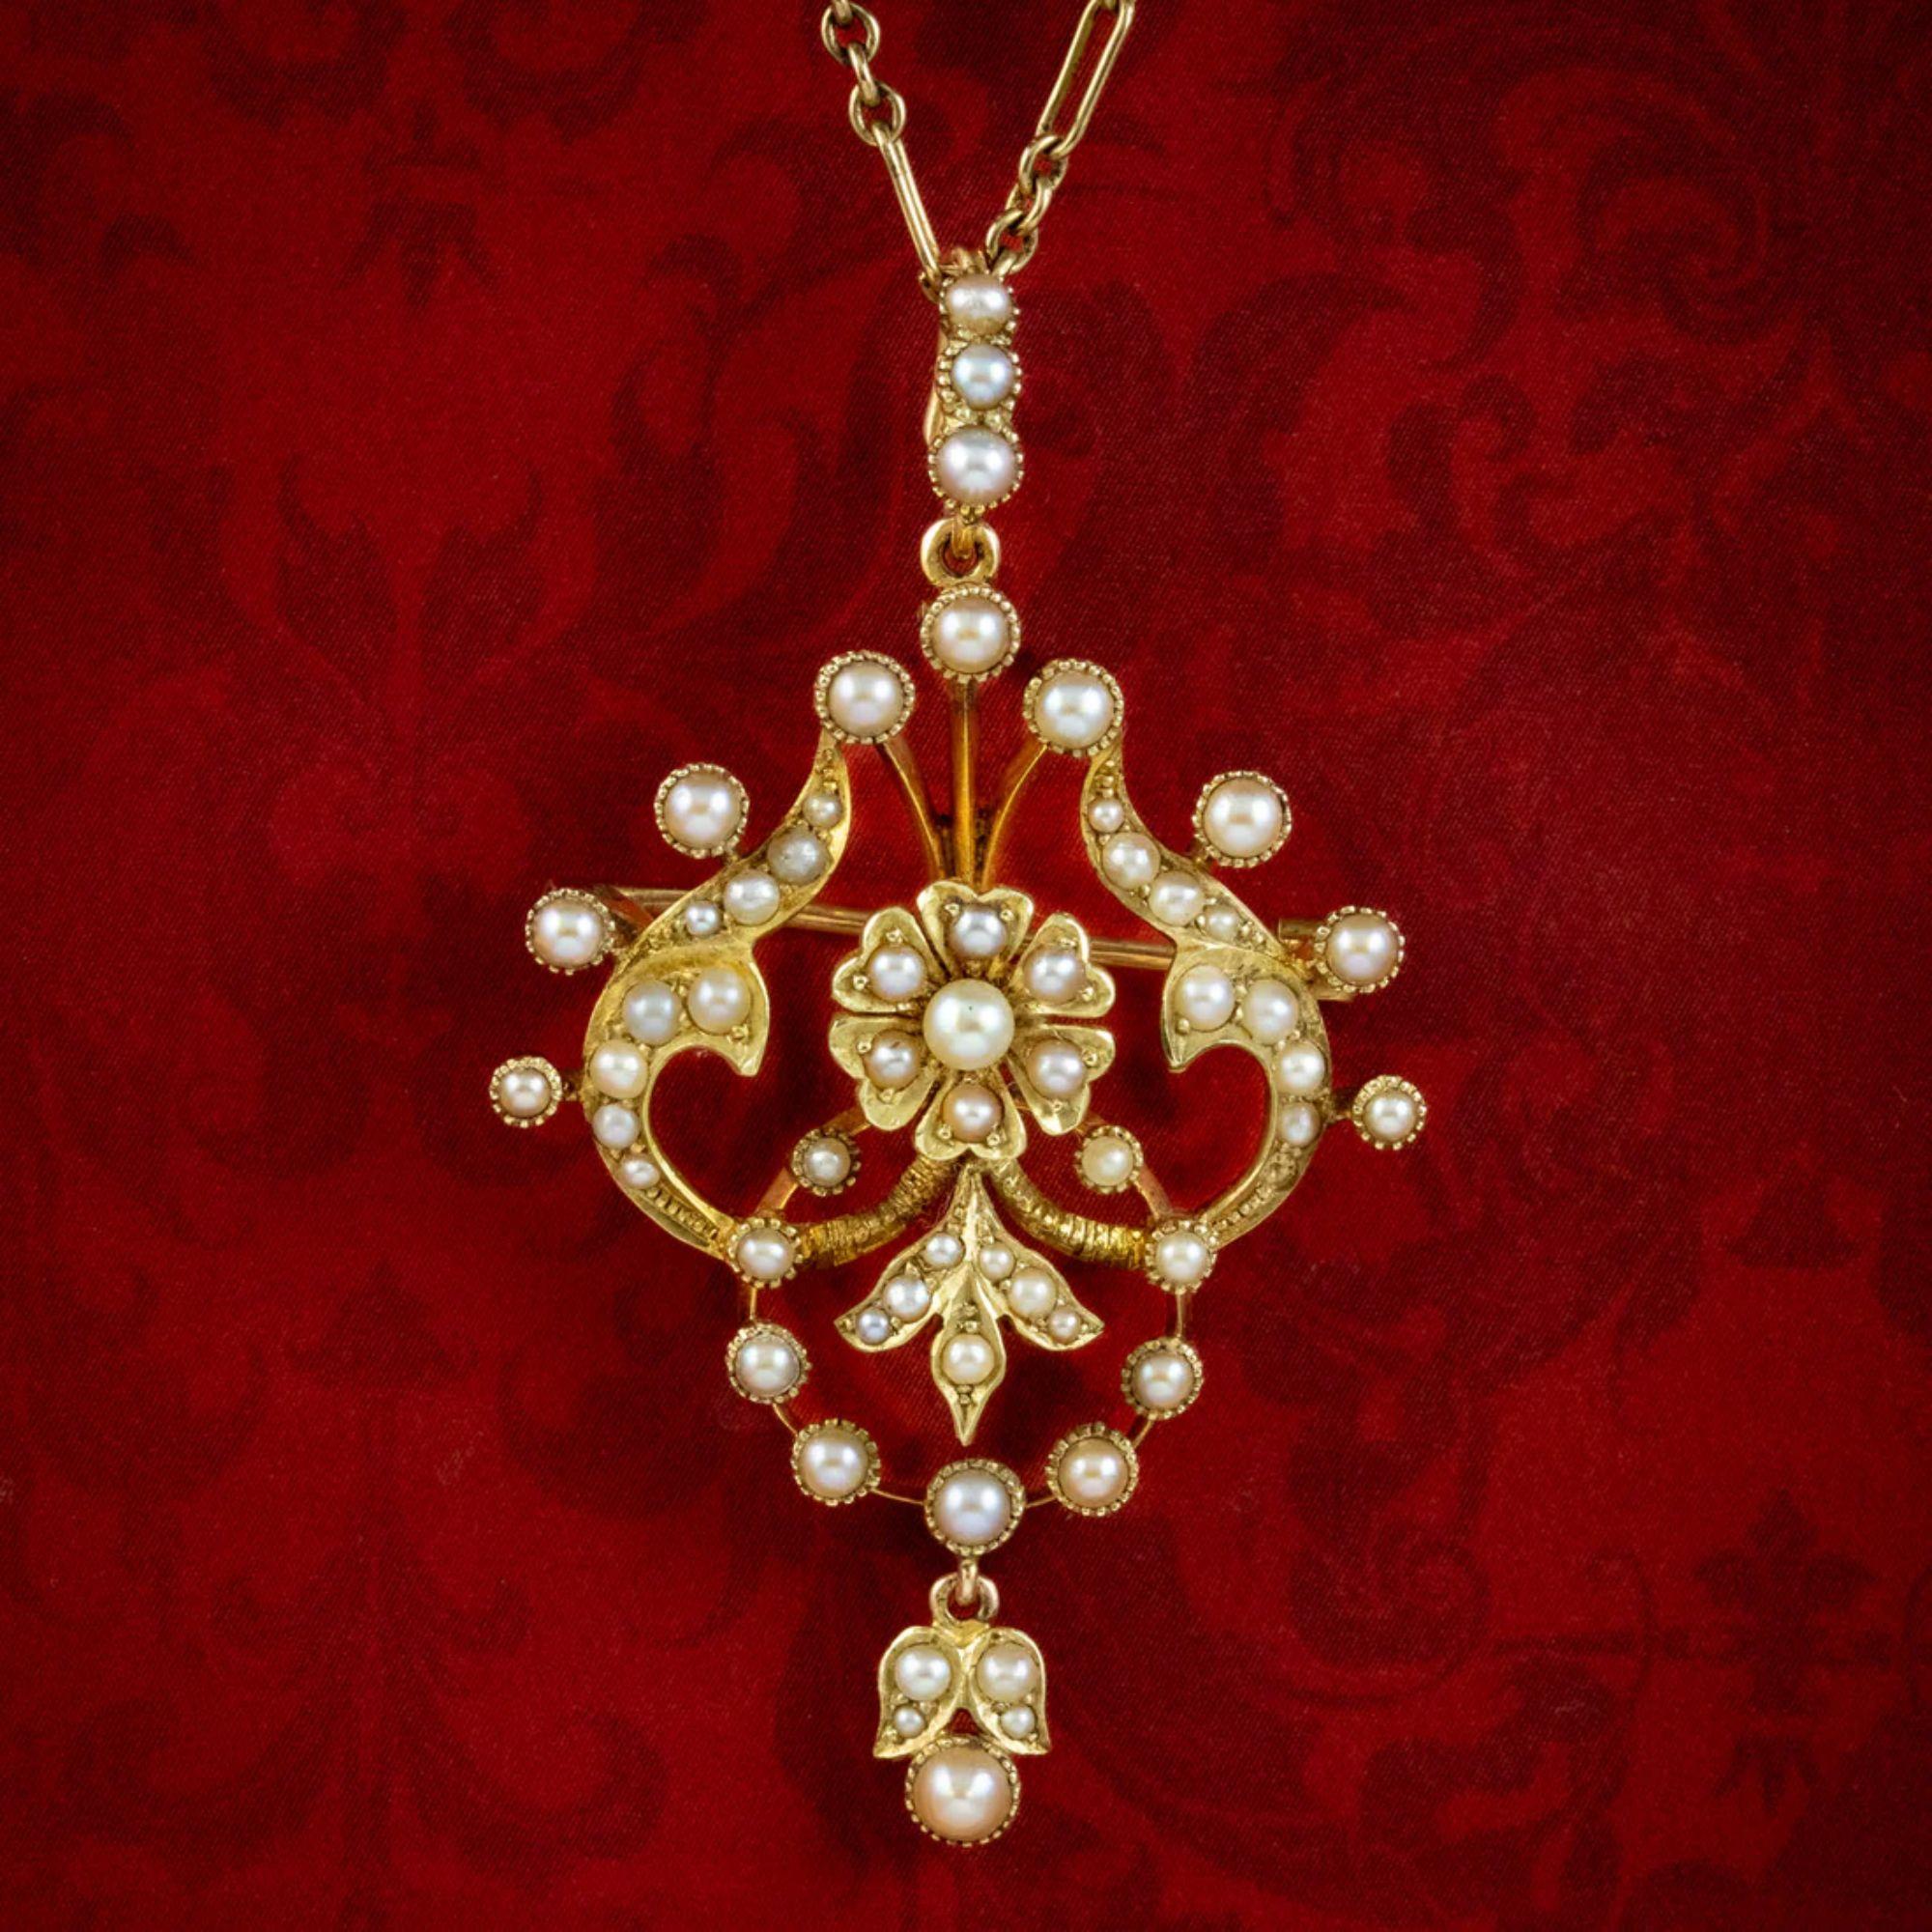 Antique Edwardian Pearl Pendant Necklace in 15ct Gold, circa 1901-1915 For Sale 1